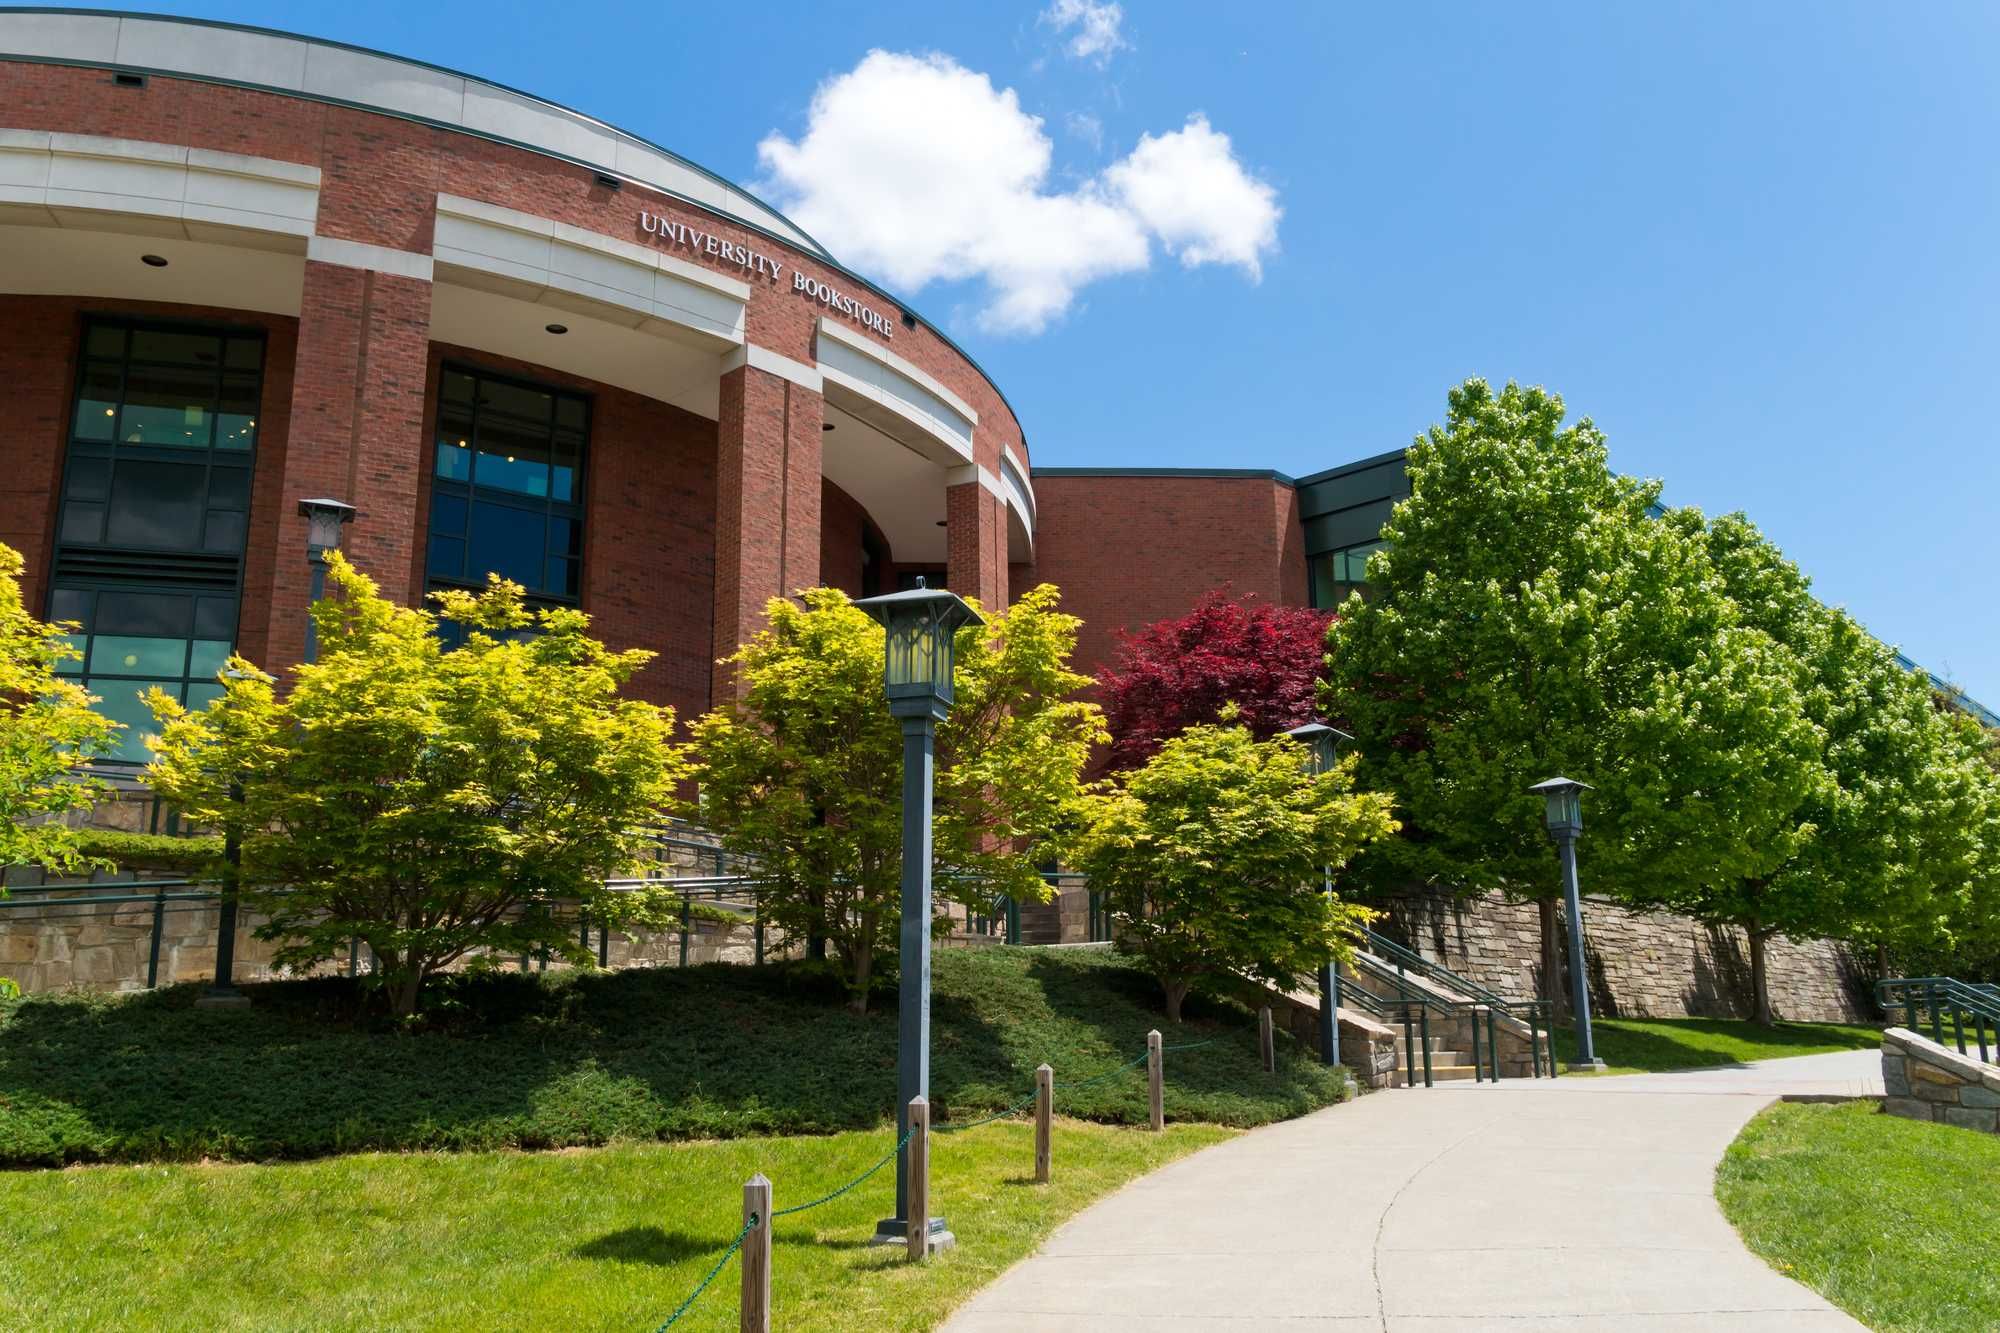 George Washington University allegedly denied refunds to students.